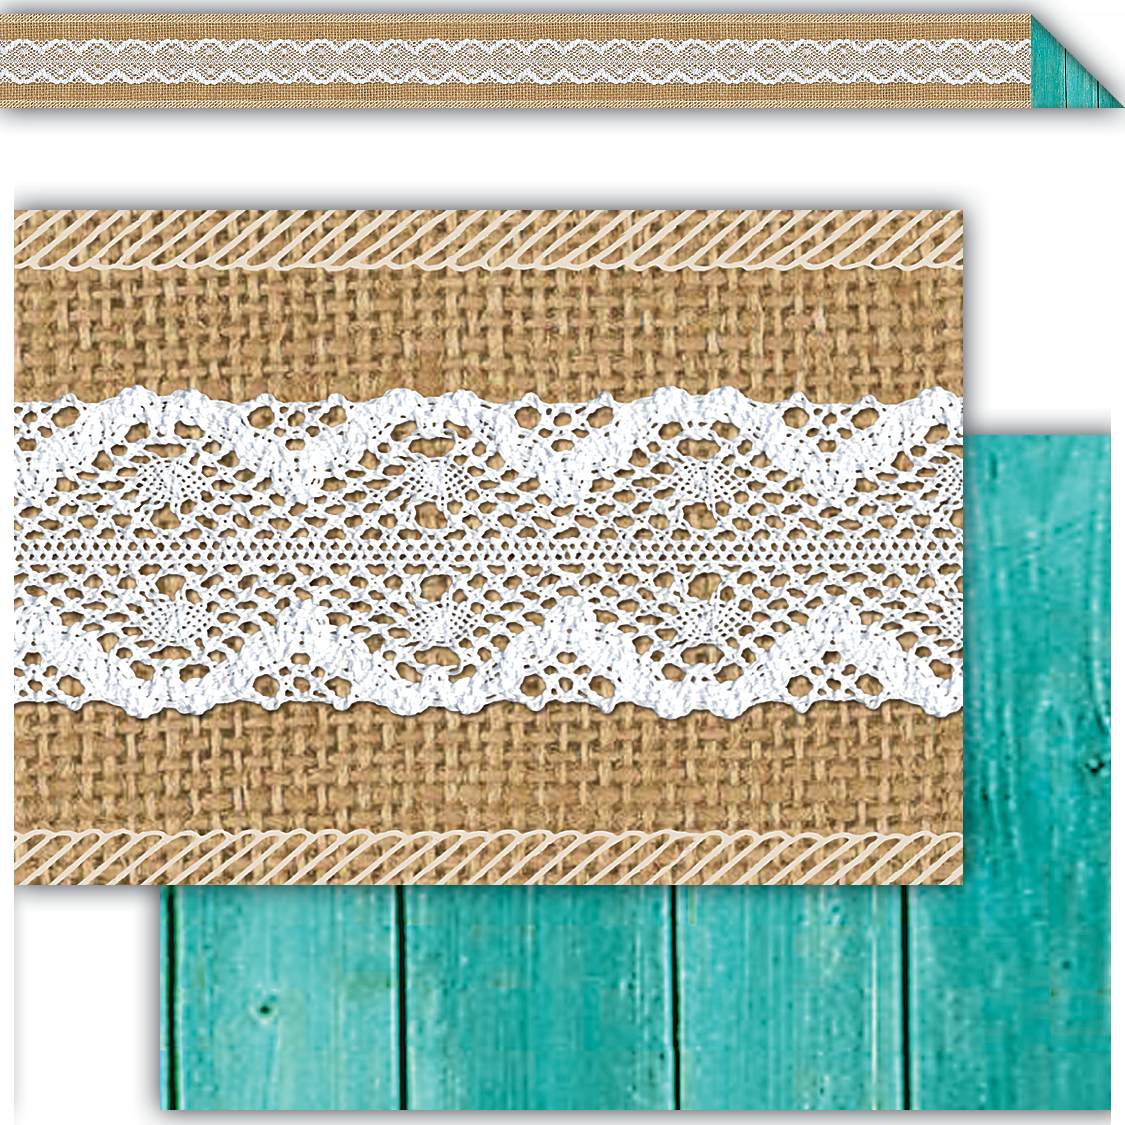 Teacher Created Resources Shabby Chic Double-Sided Border 77169 